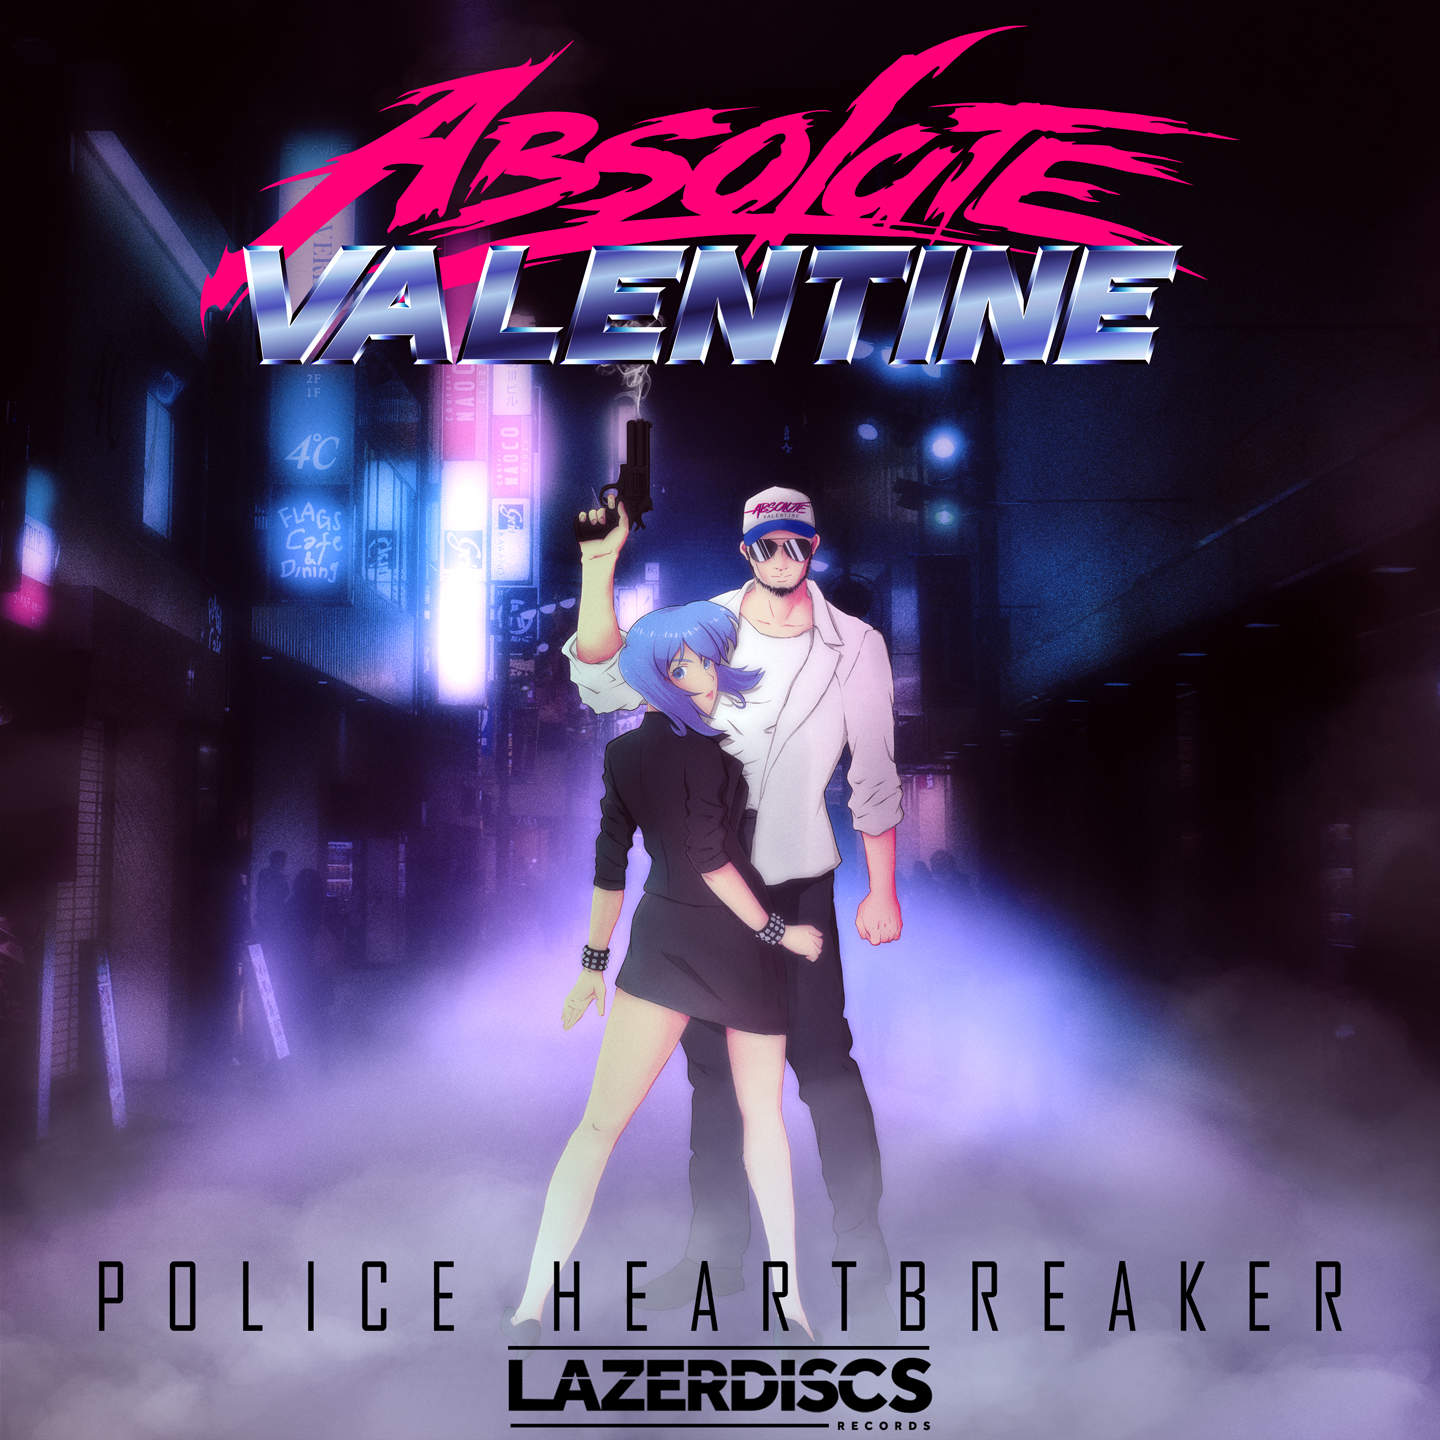 synthwave artists absoltue valentine